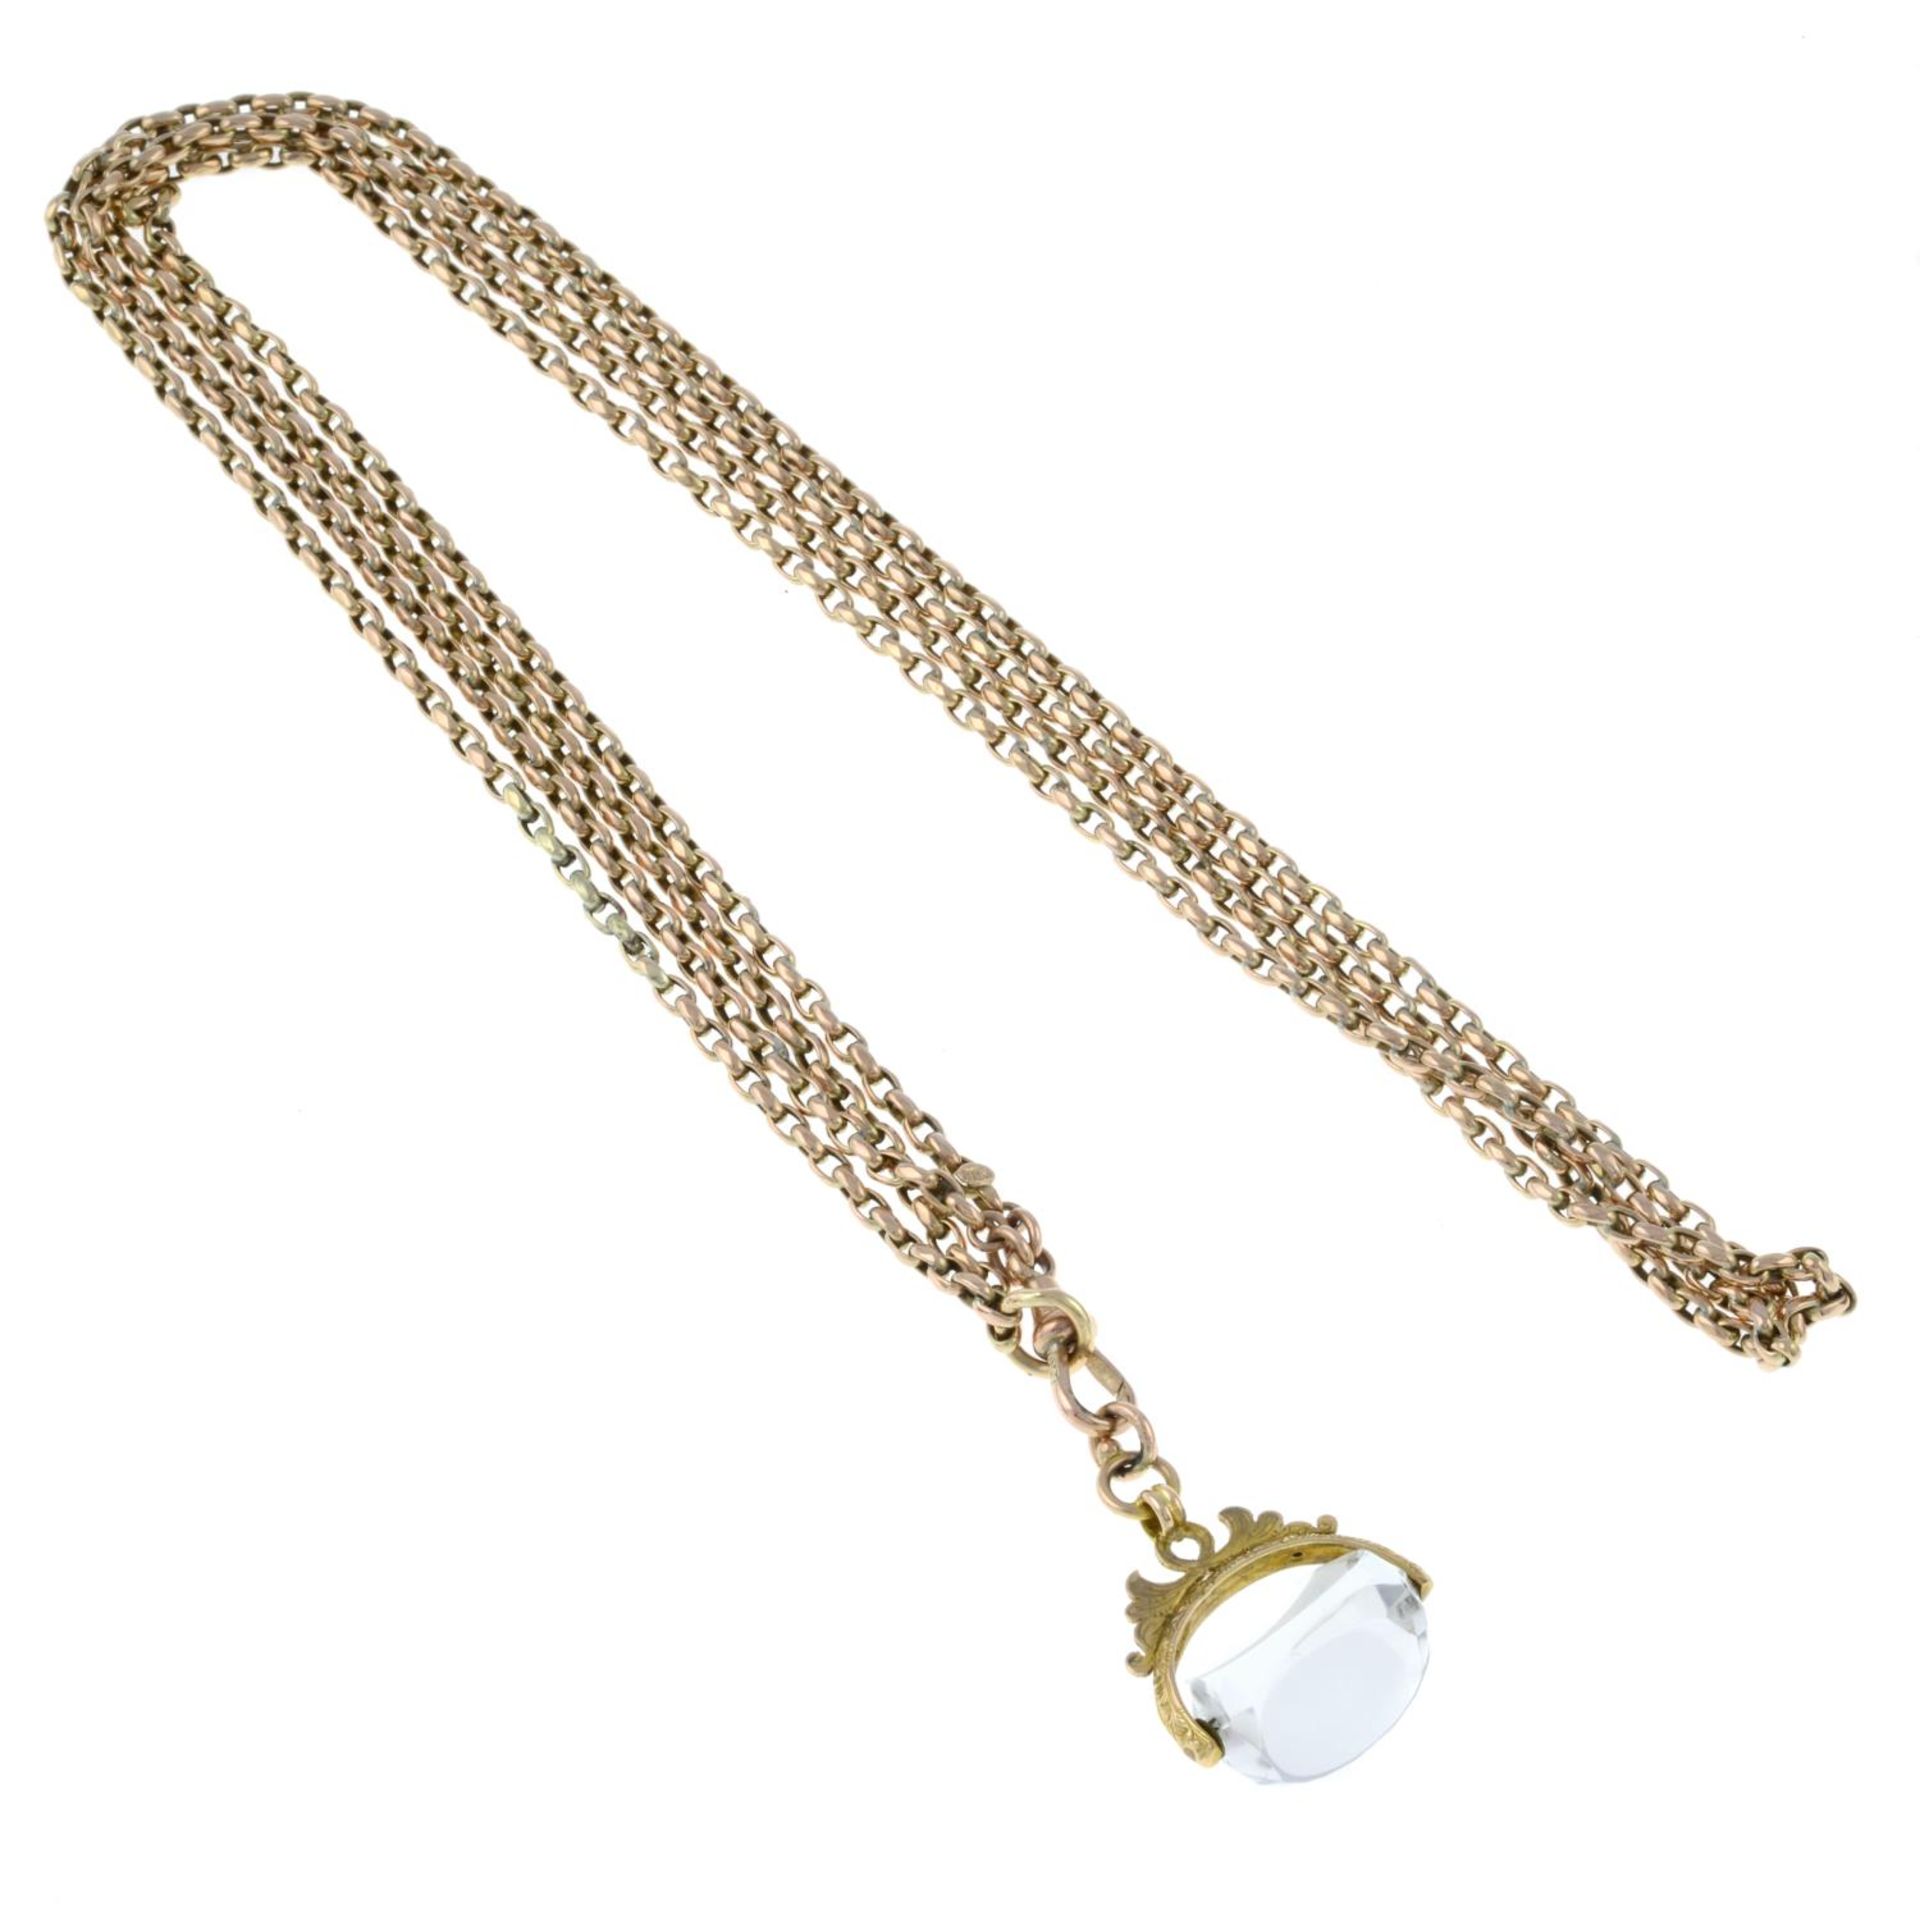 An early 20th century 9ct gold chain with rock crystal detachable fob.Stamped 9ct.Length of chain - Image 2 of 2